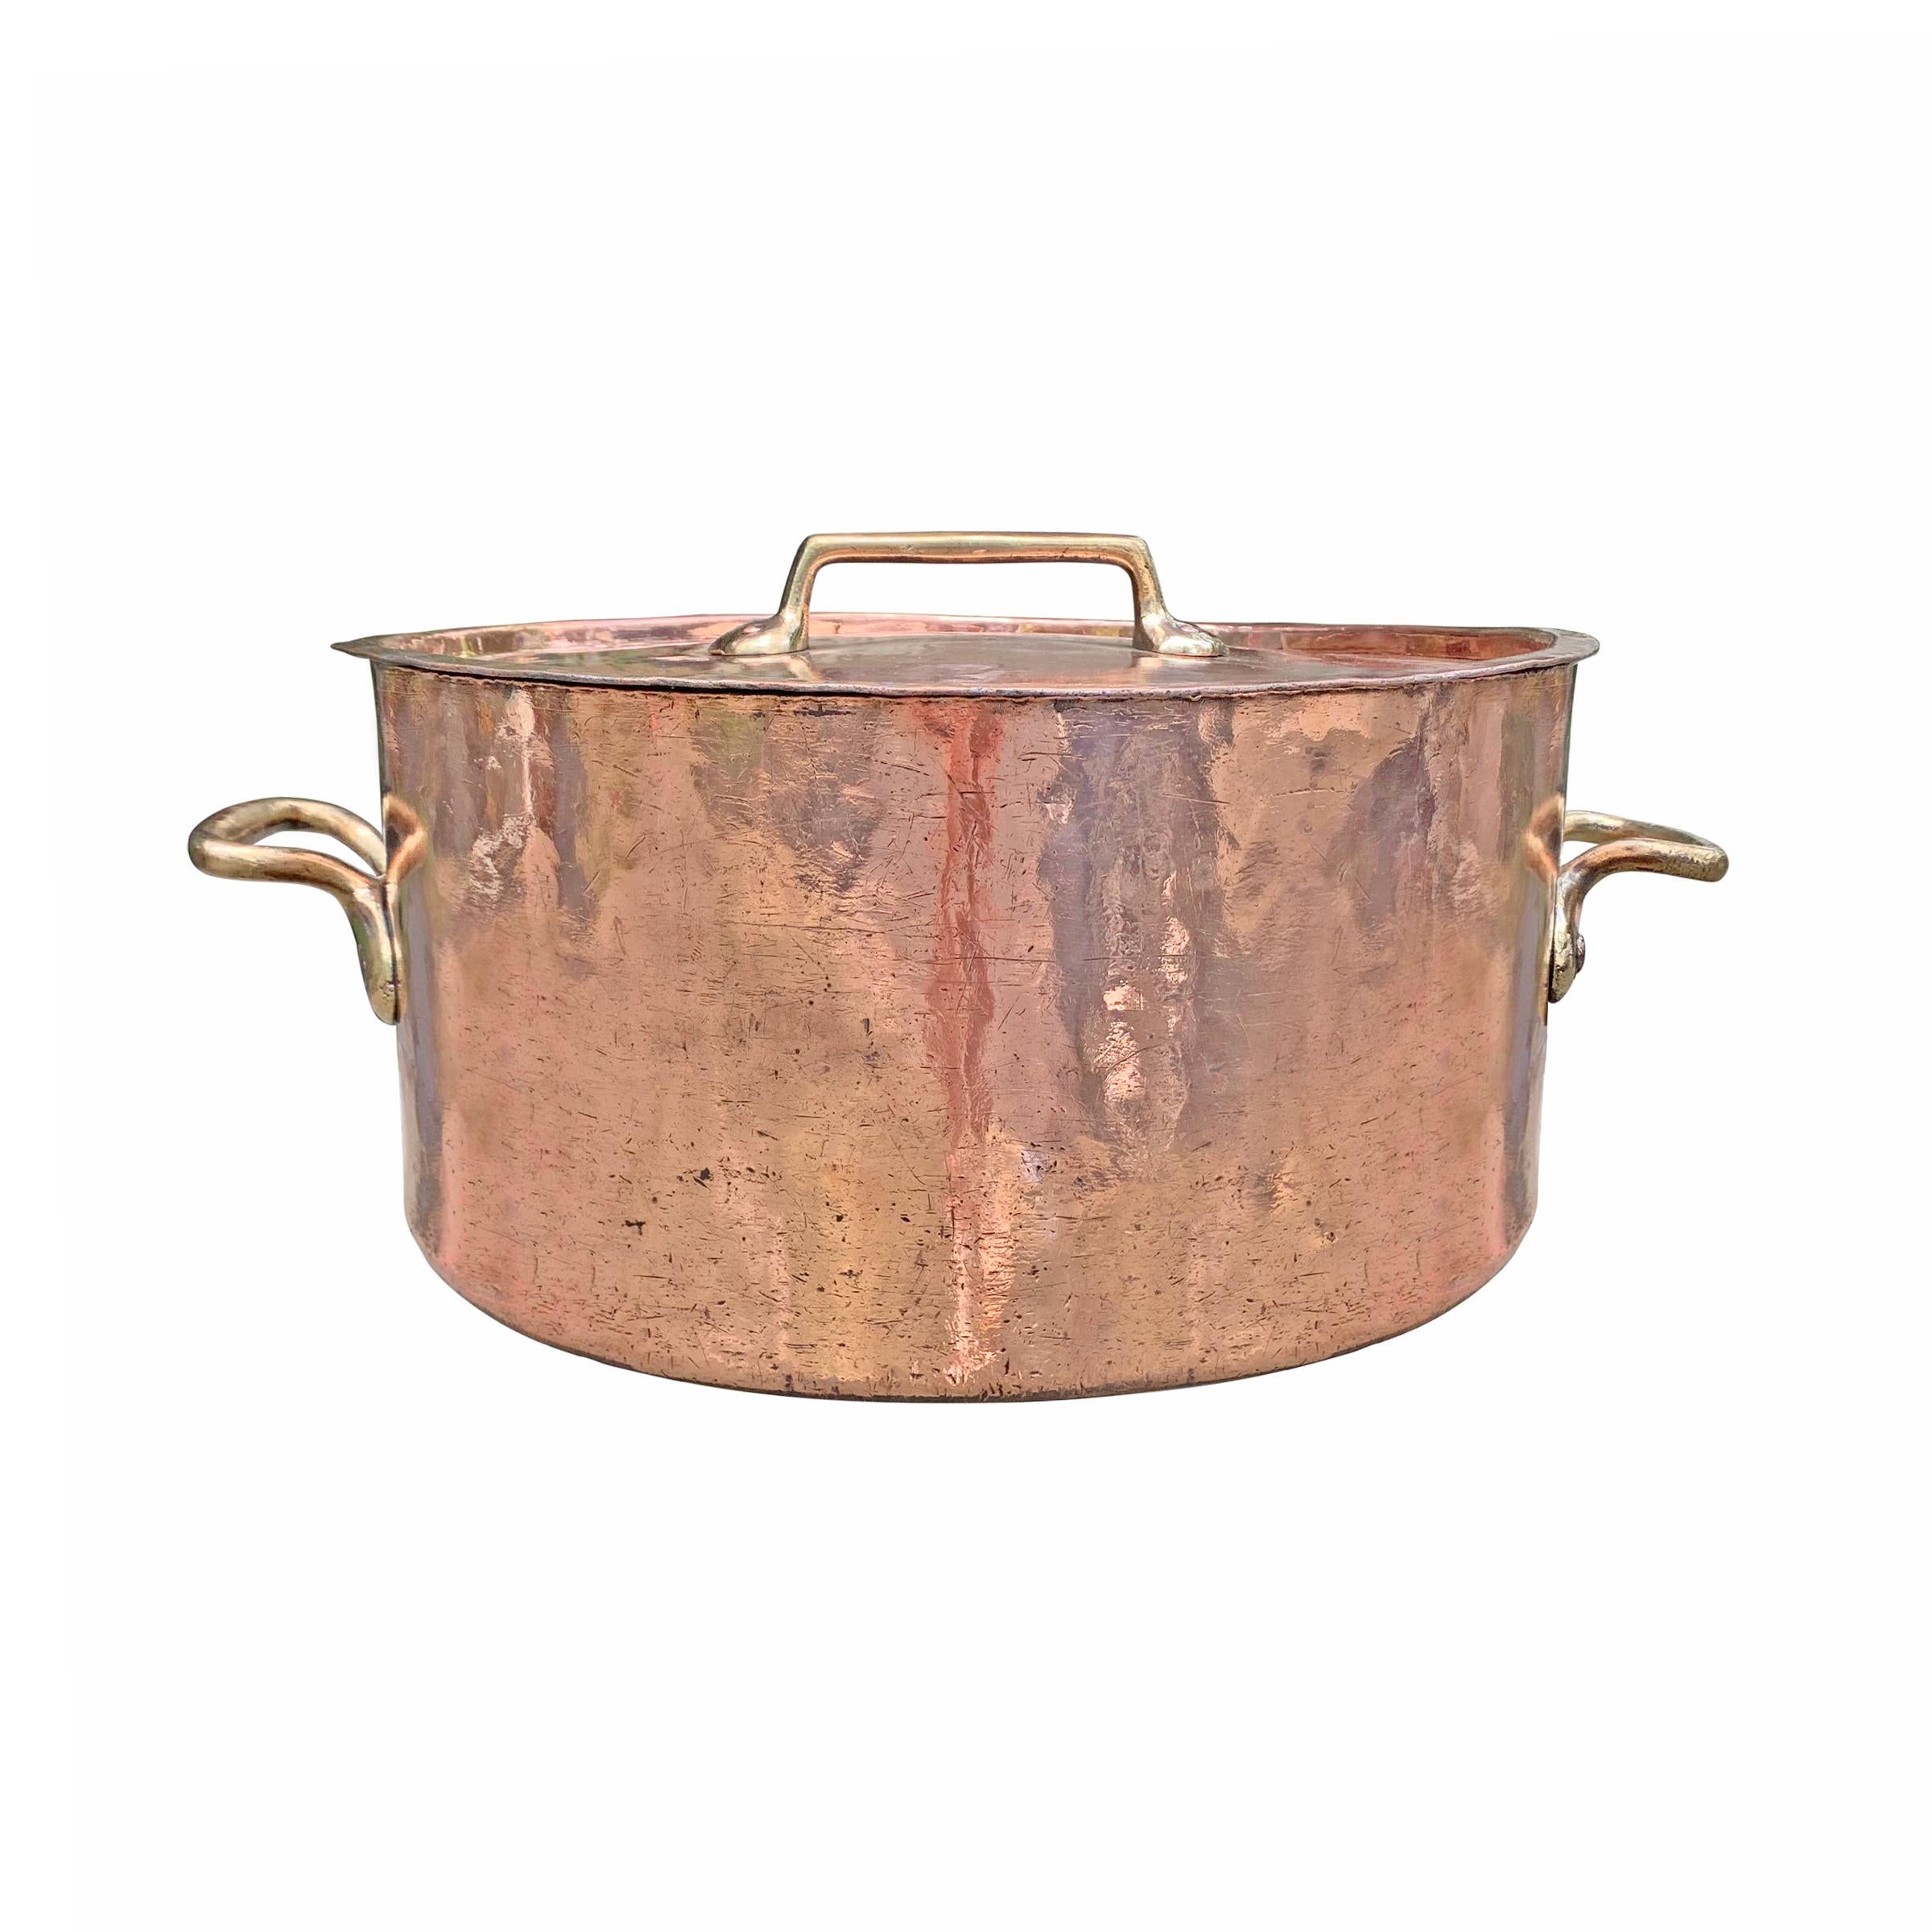 An incredibly rare monumental 19th century French hand-hammered 5-mm thick 65-quart copper pot with bronze handles, engraved with the number 